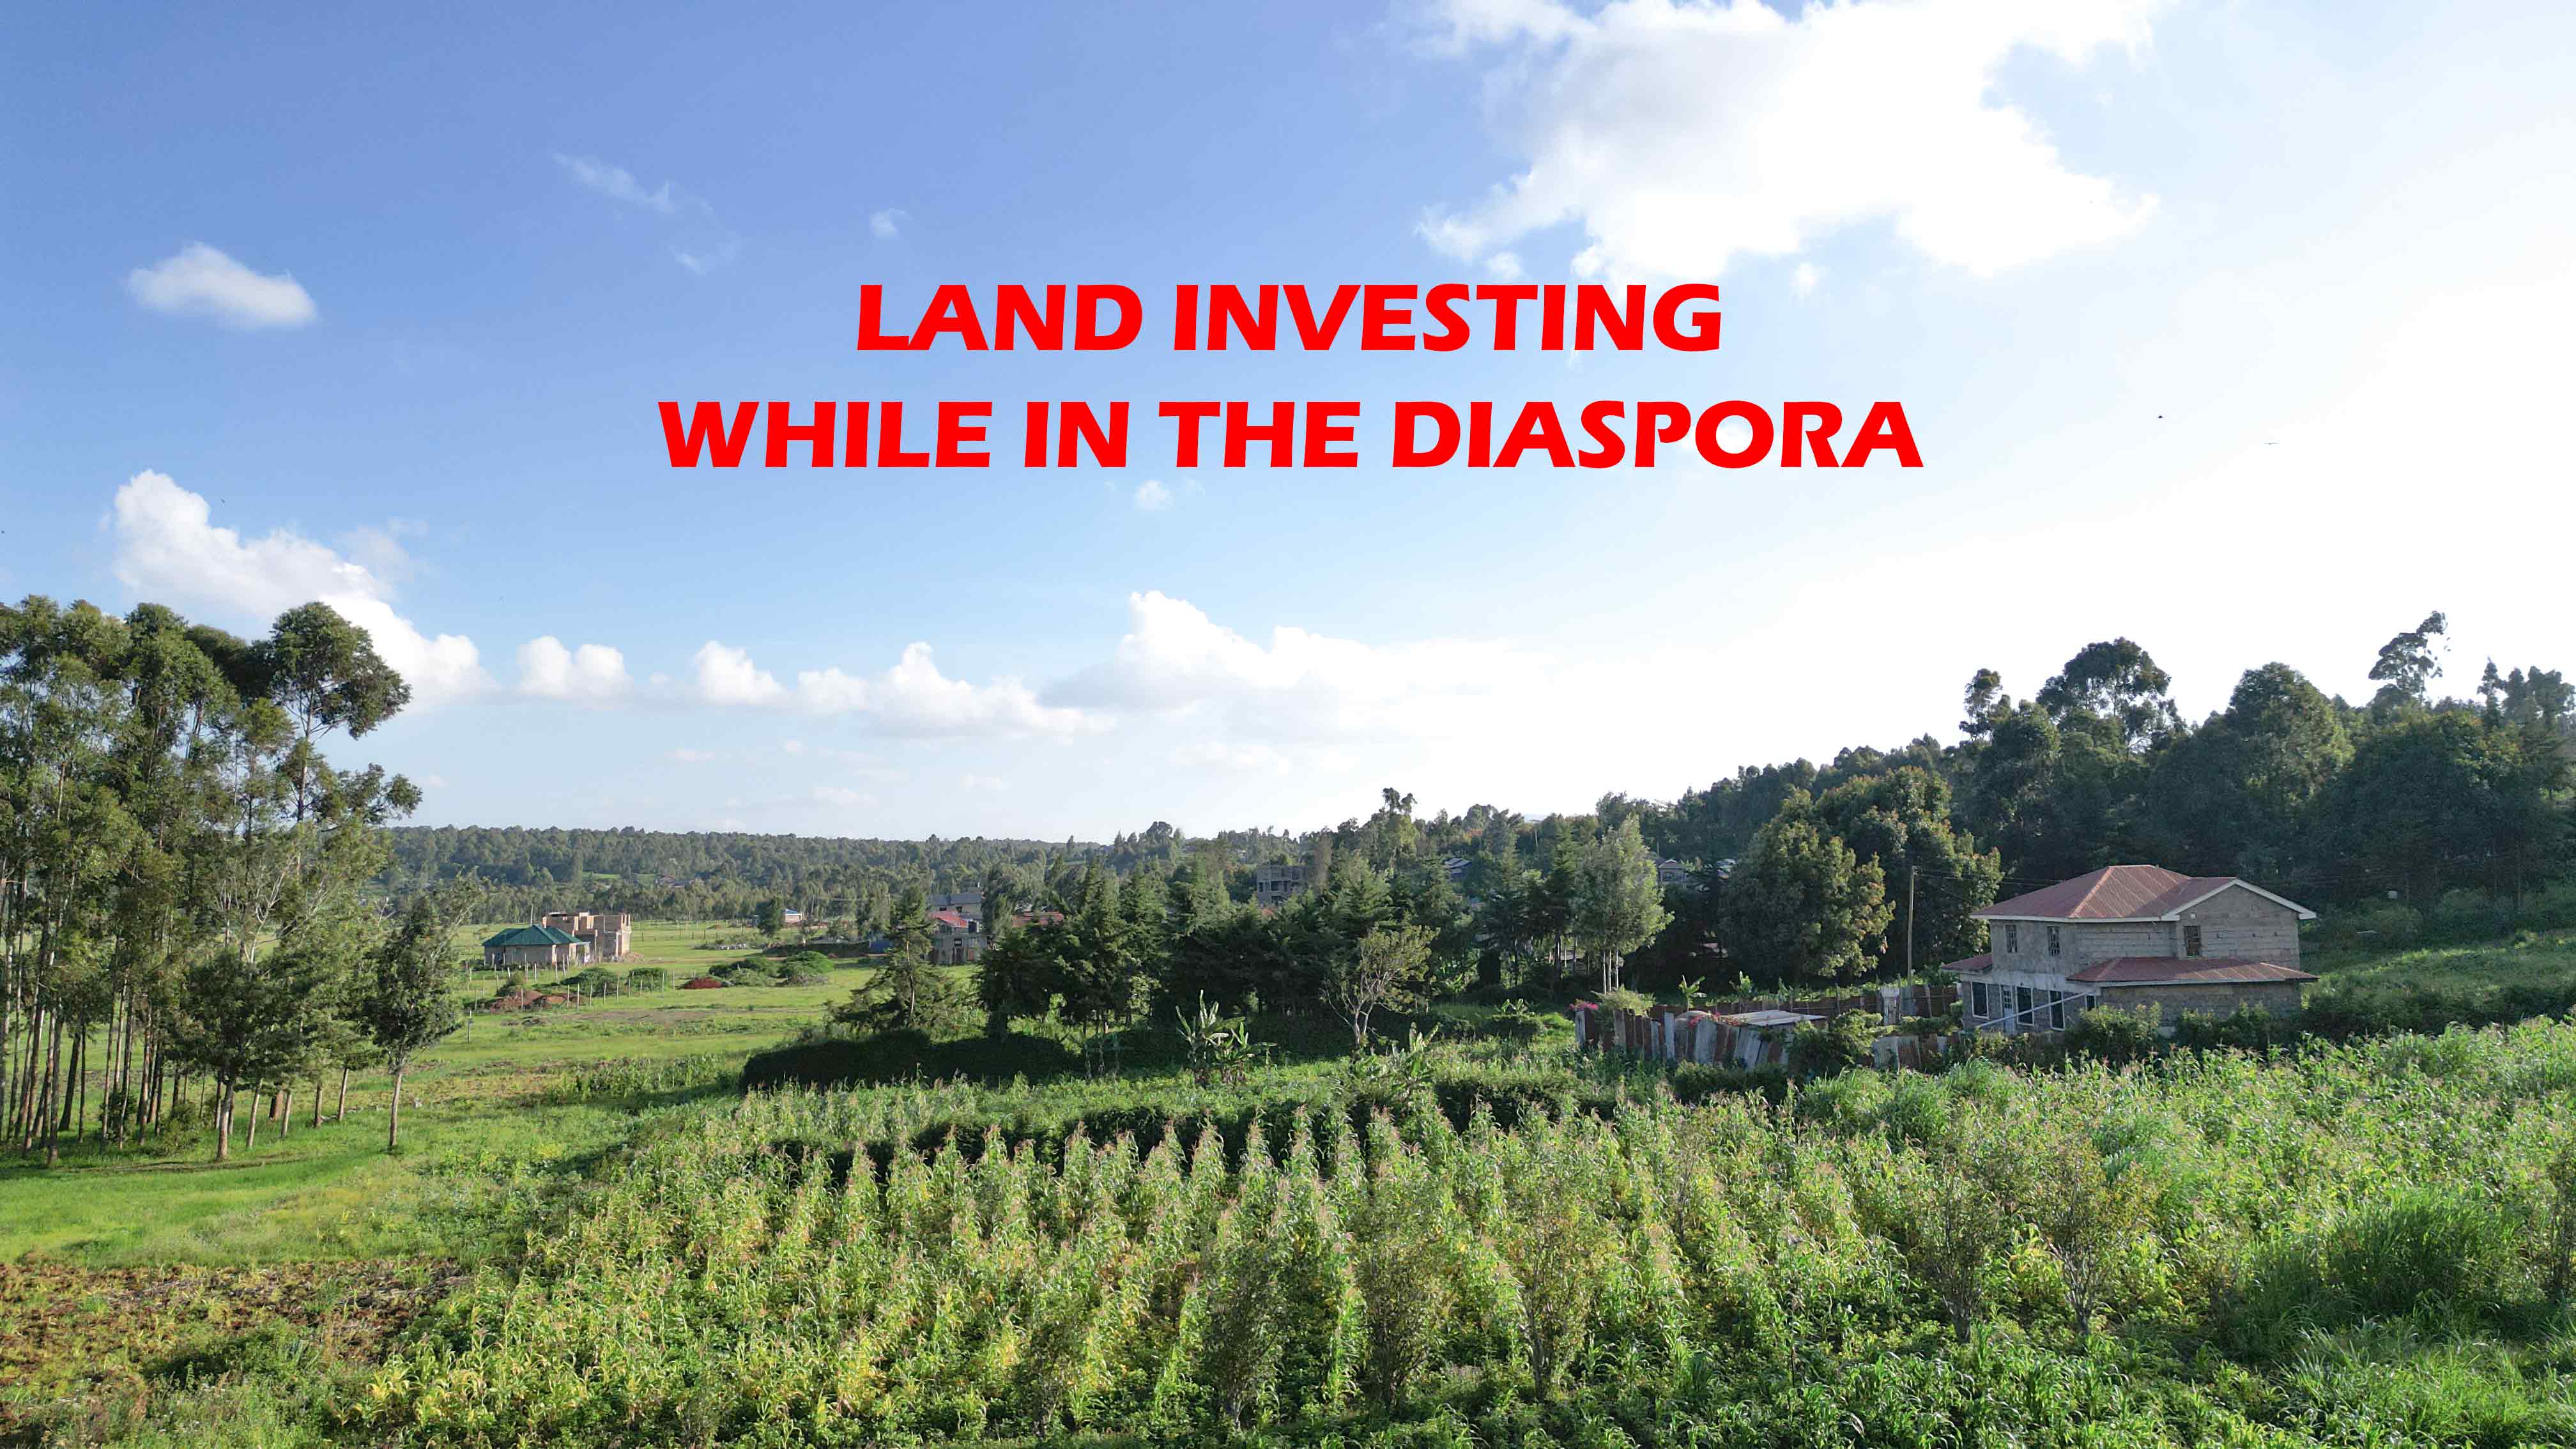 How To Make Payments From the Diaspora While Buying Land In Kenya